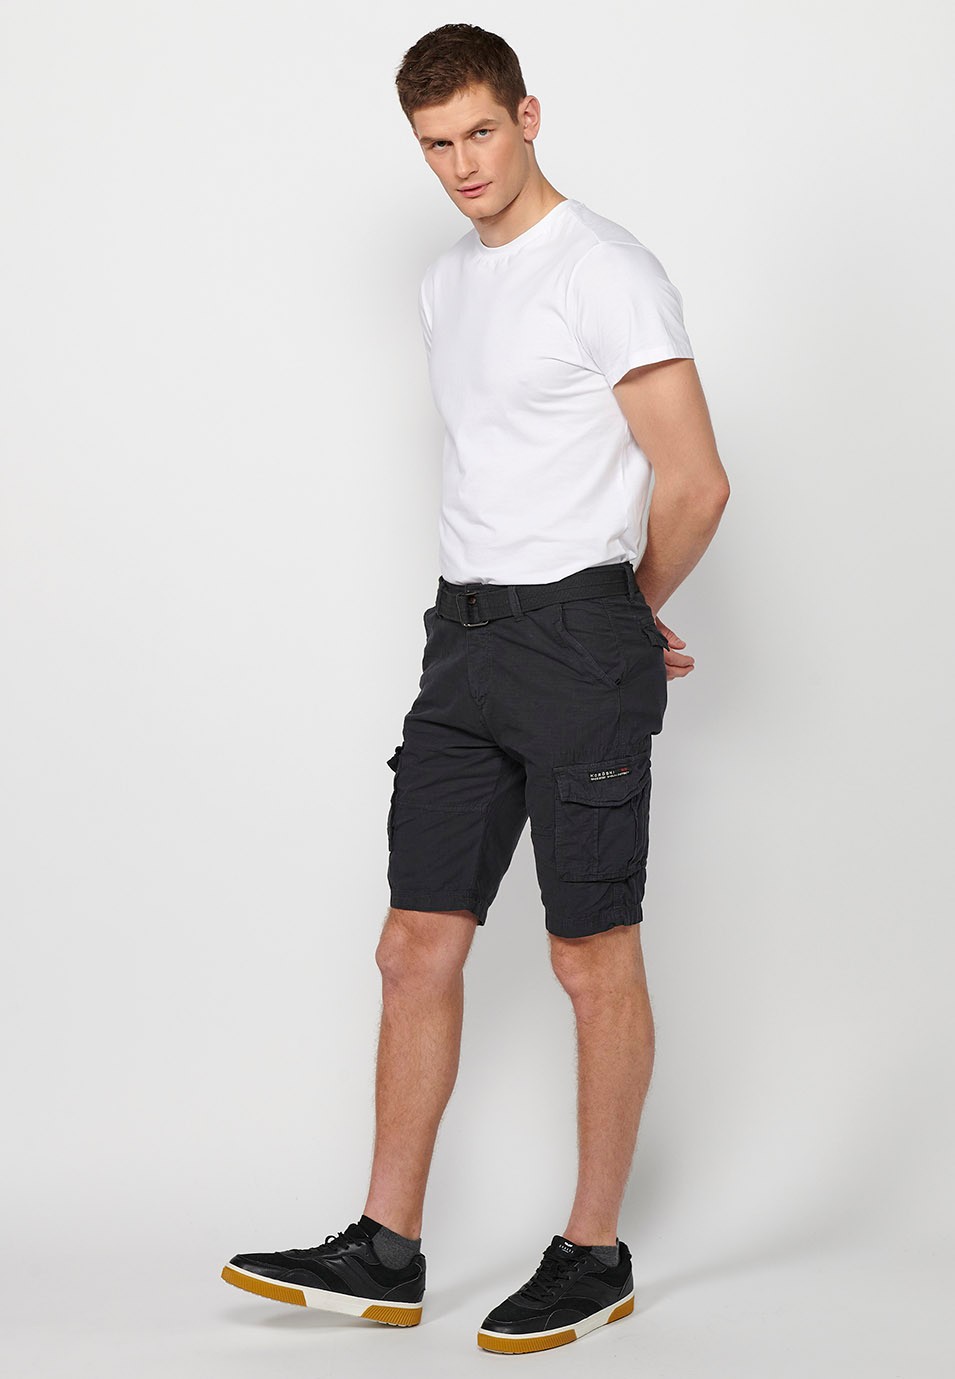 Cotton Cargo Shorts with Belt and Front Closure with Zipper and Button with Pockets, Two Back Pockets with Flap and Two Black Cargo Pants for Men